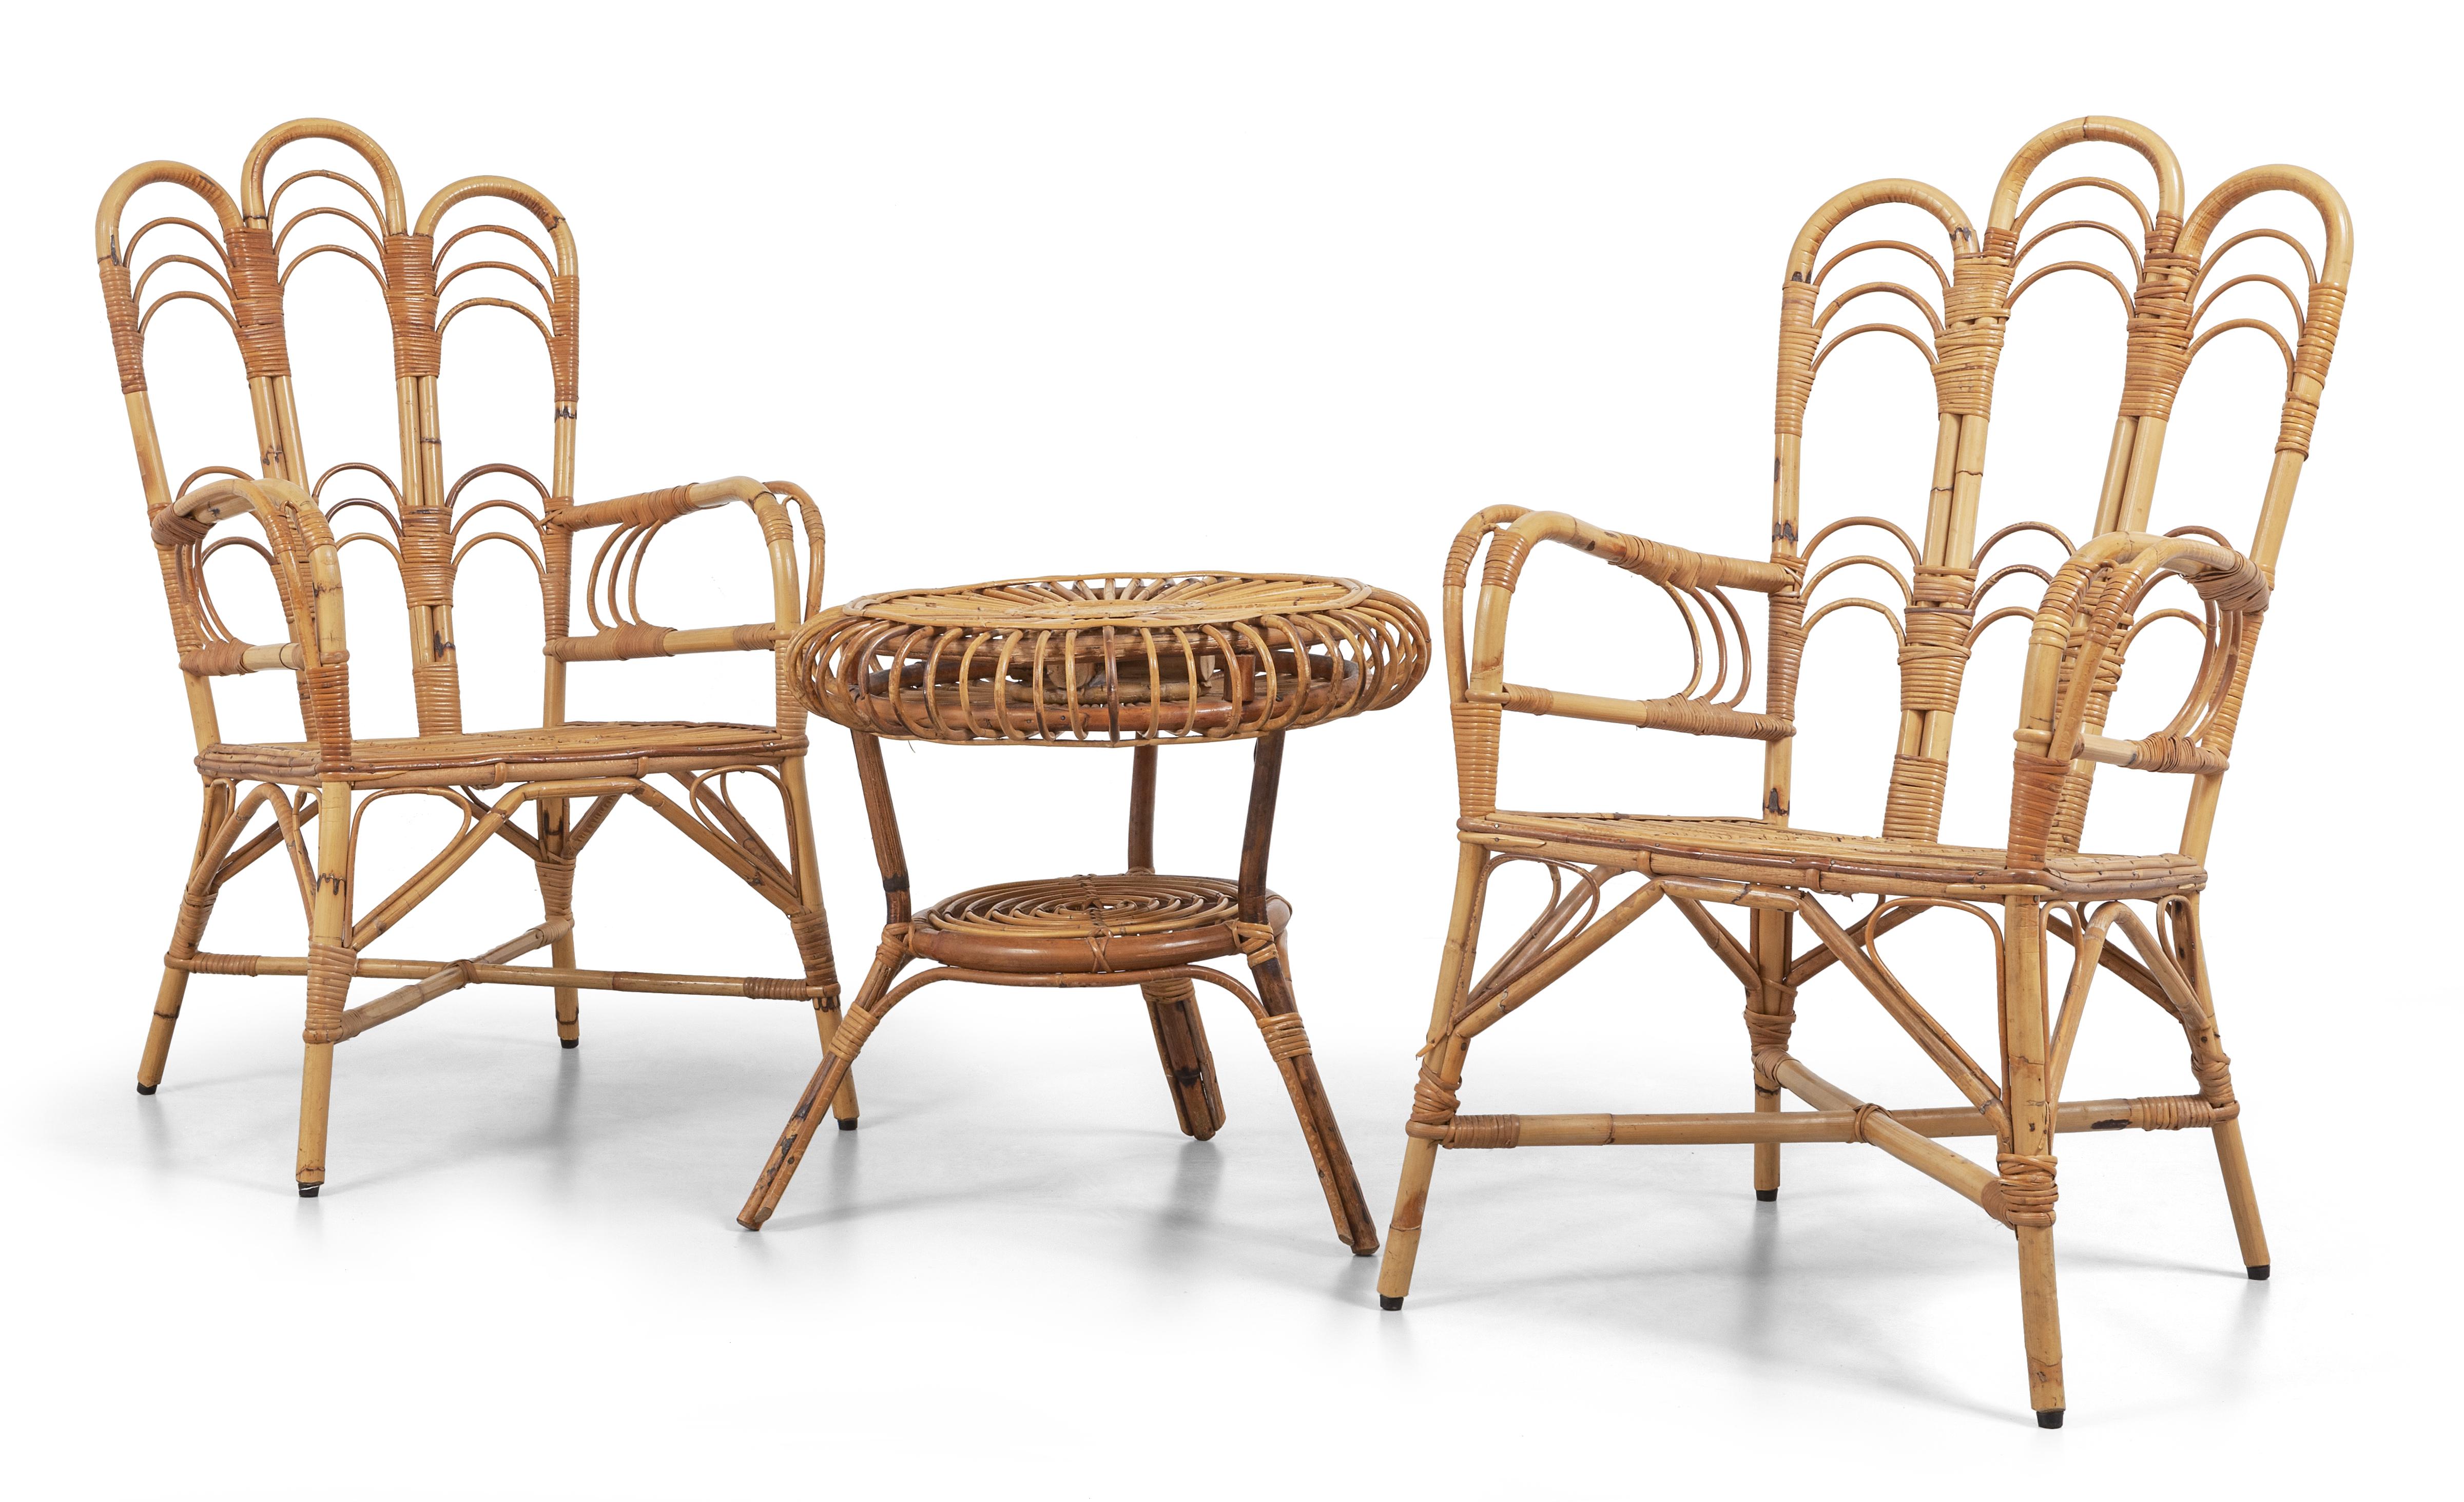 Elegant set of two armchairs and a round coffee table in rattan and bamboo. 

Made in Italy in the 1960s. 

Dimensions: 
- Armachairs: 100 cm height, 42 cm seated height, 60cm width, 65cm depth. 
- Table: 57 cm height, 60 cm diameter.